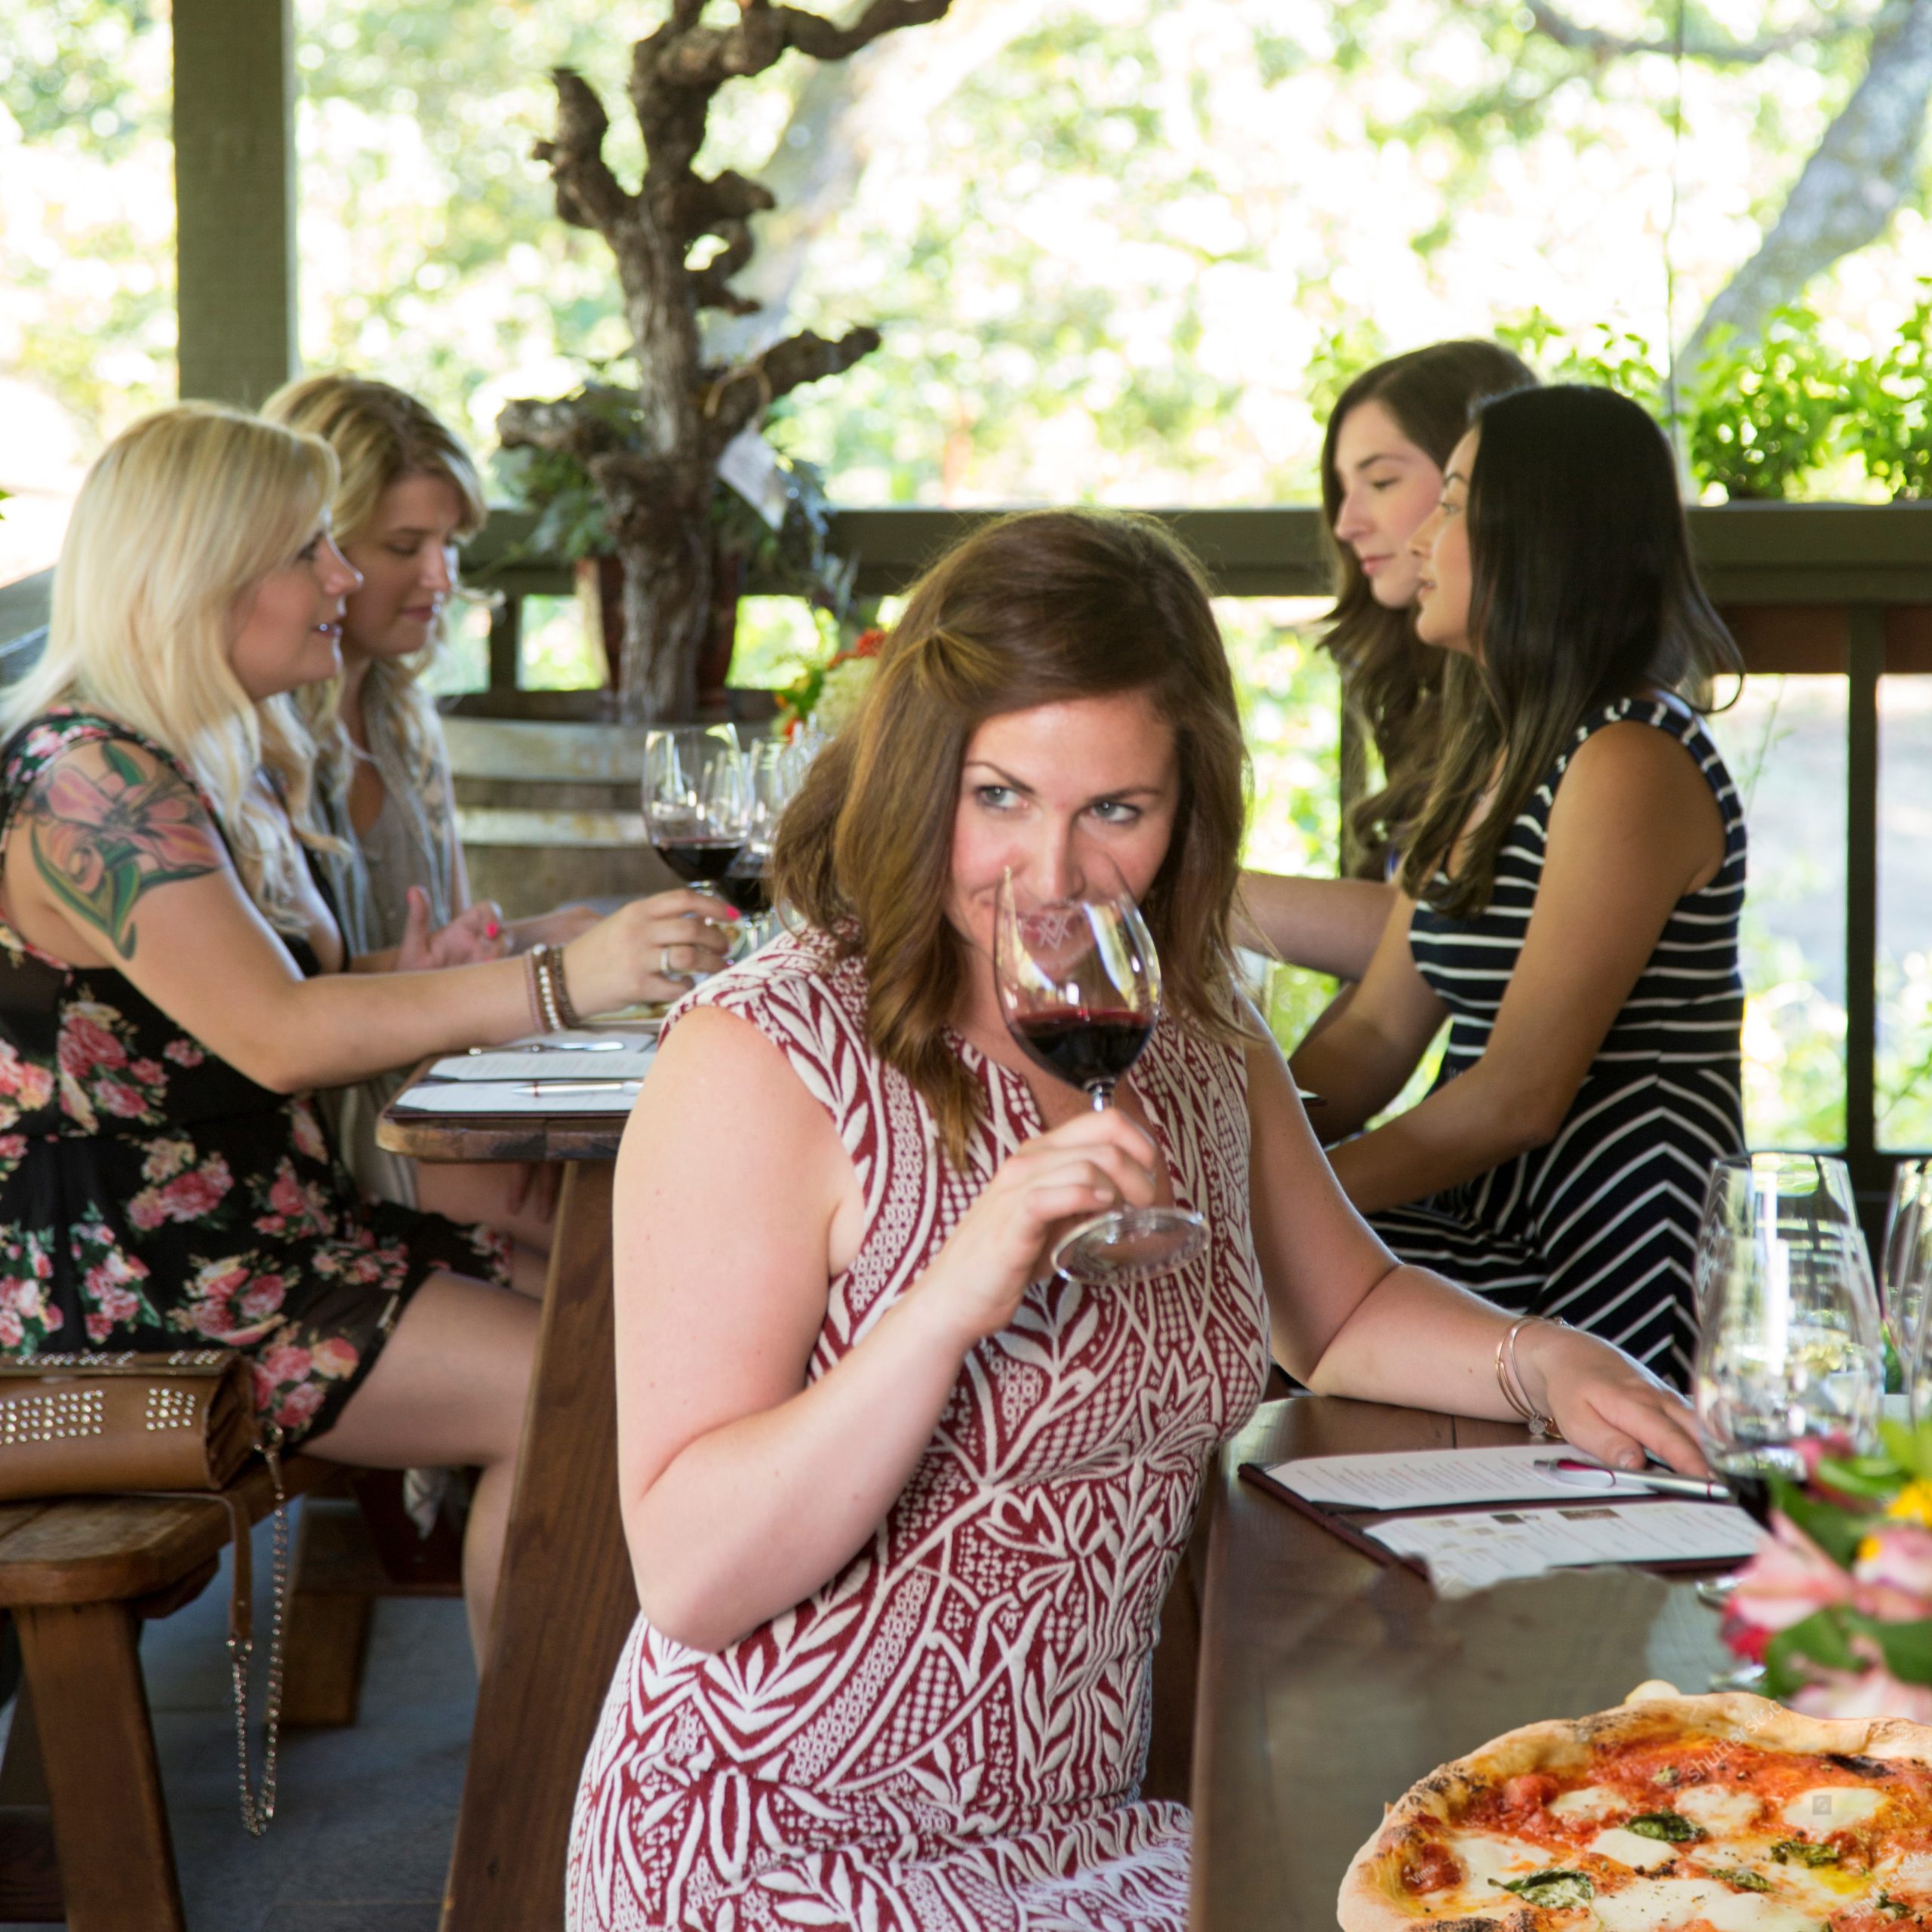 Saturday to Remember: Pizza, Wine & Harvest